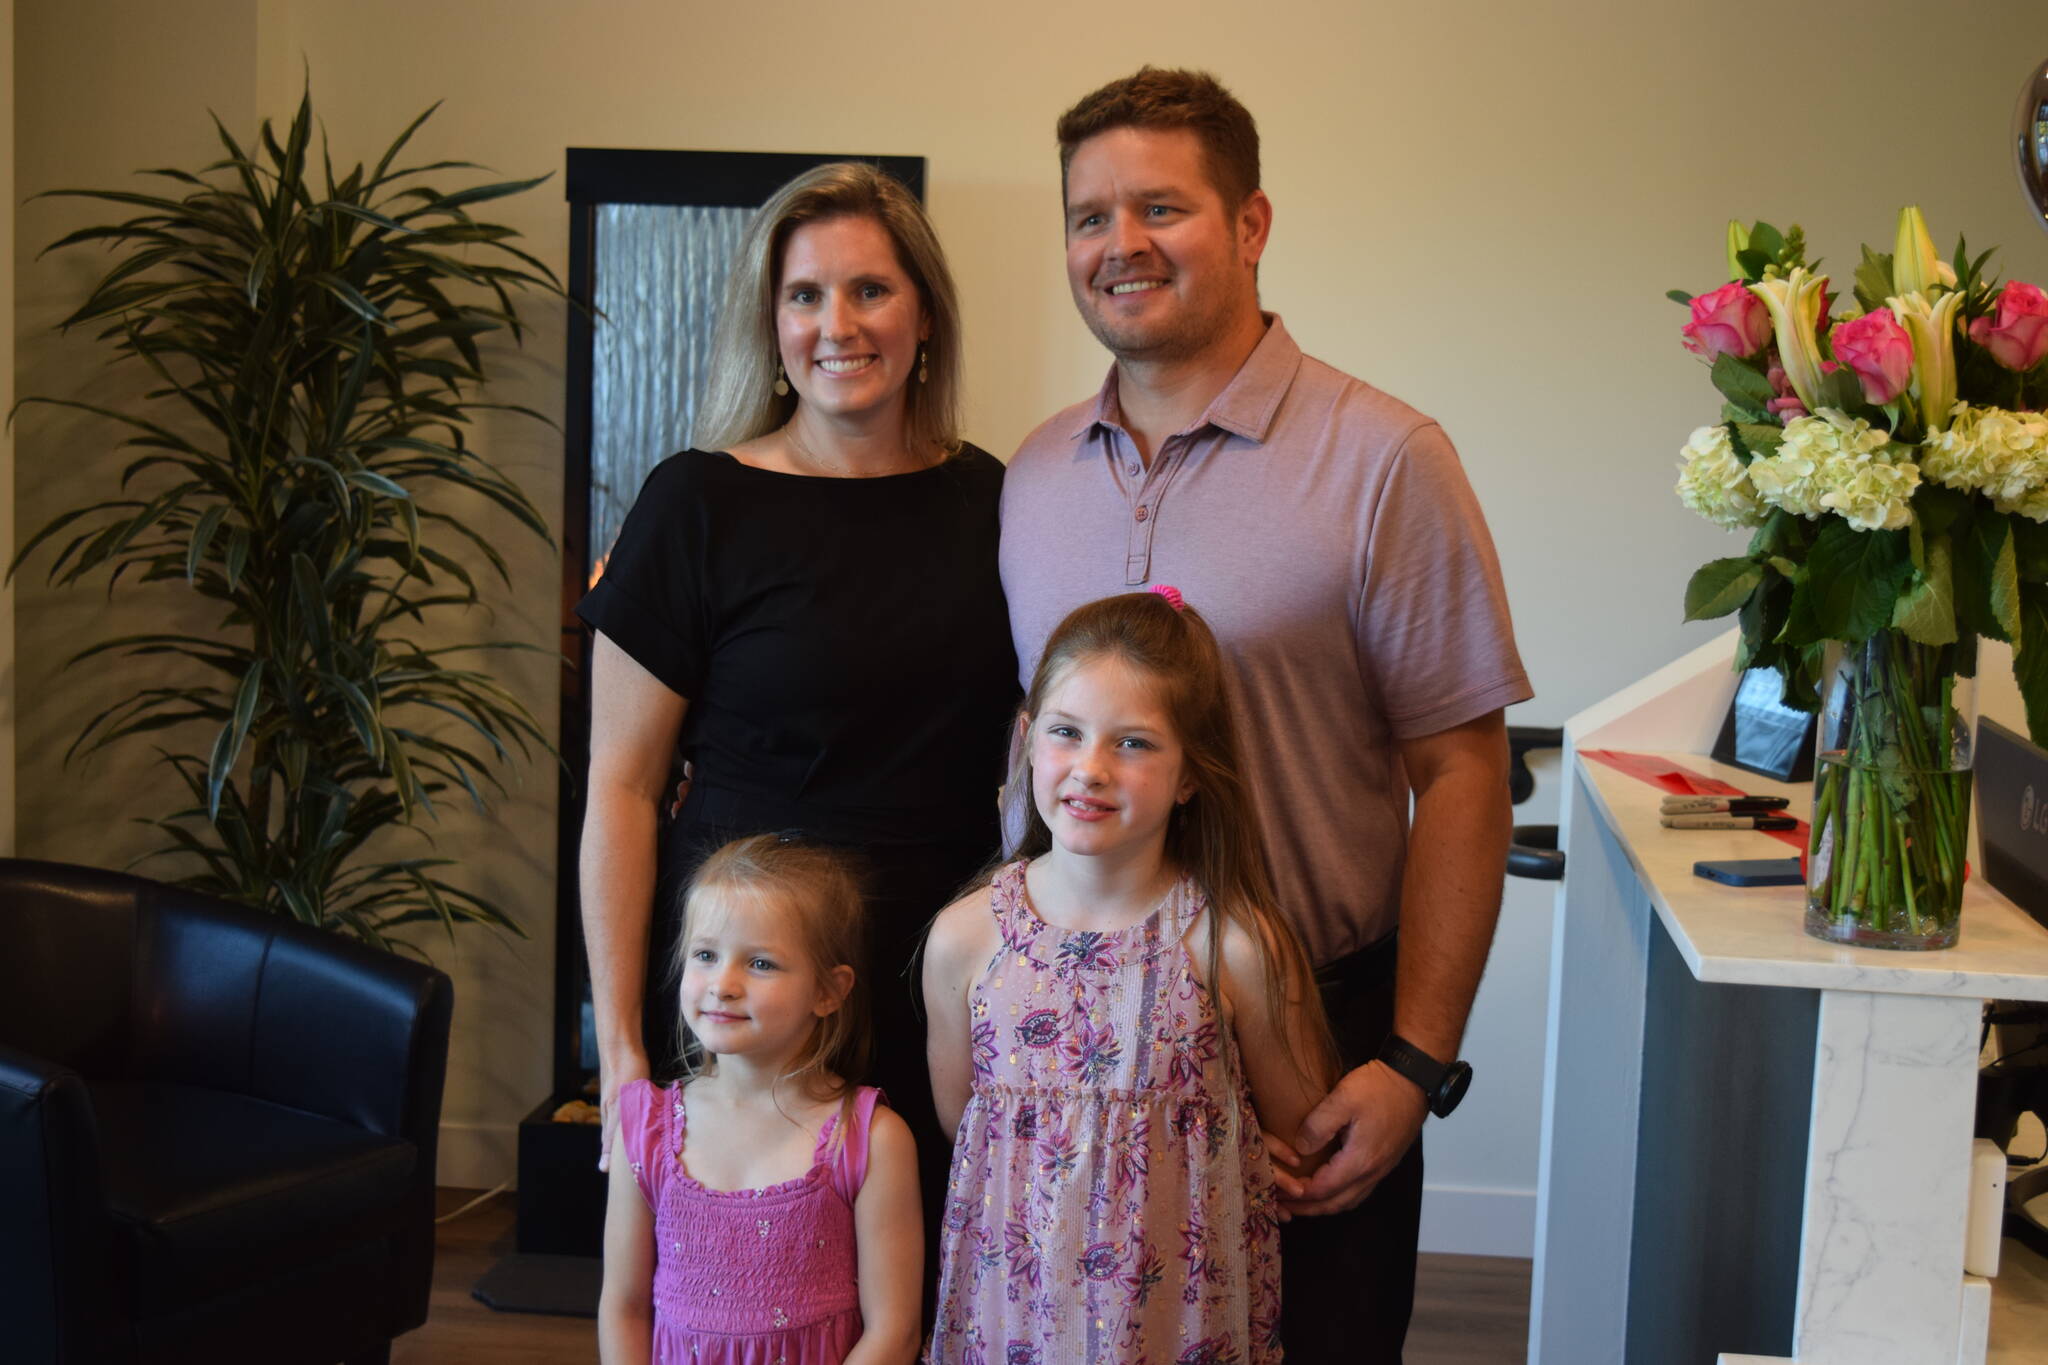 Dr. Stephenie Tornberg of ROW Health poses for a photo alongside husband Ben and two daughters, Madison and Teagan. Photo by Conor Wilson/Valley Record